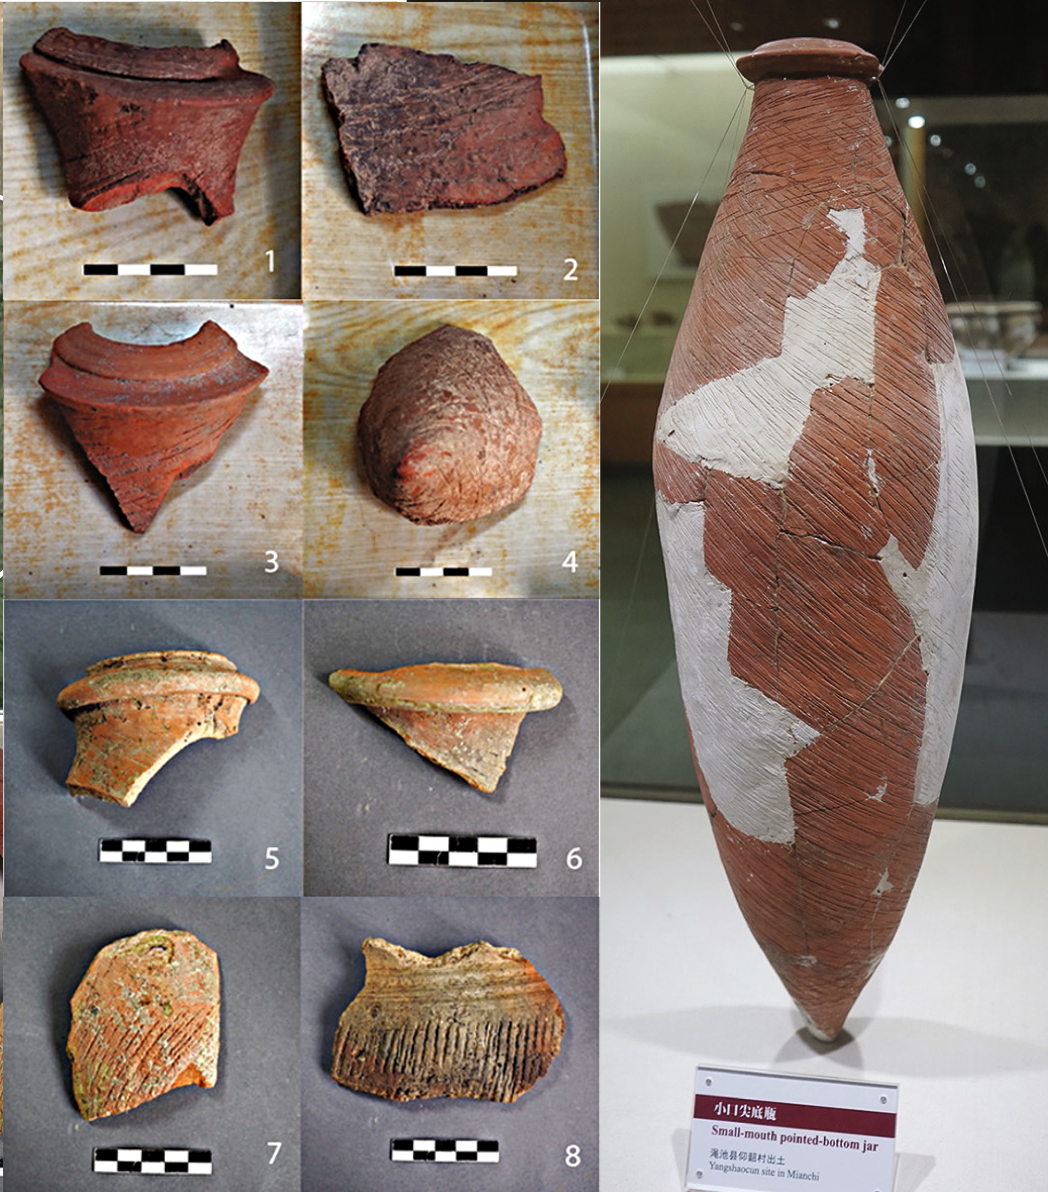 Yangshao-Culture Dingcun sherds with molds and starch Li Liu 2020